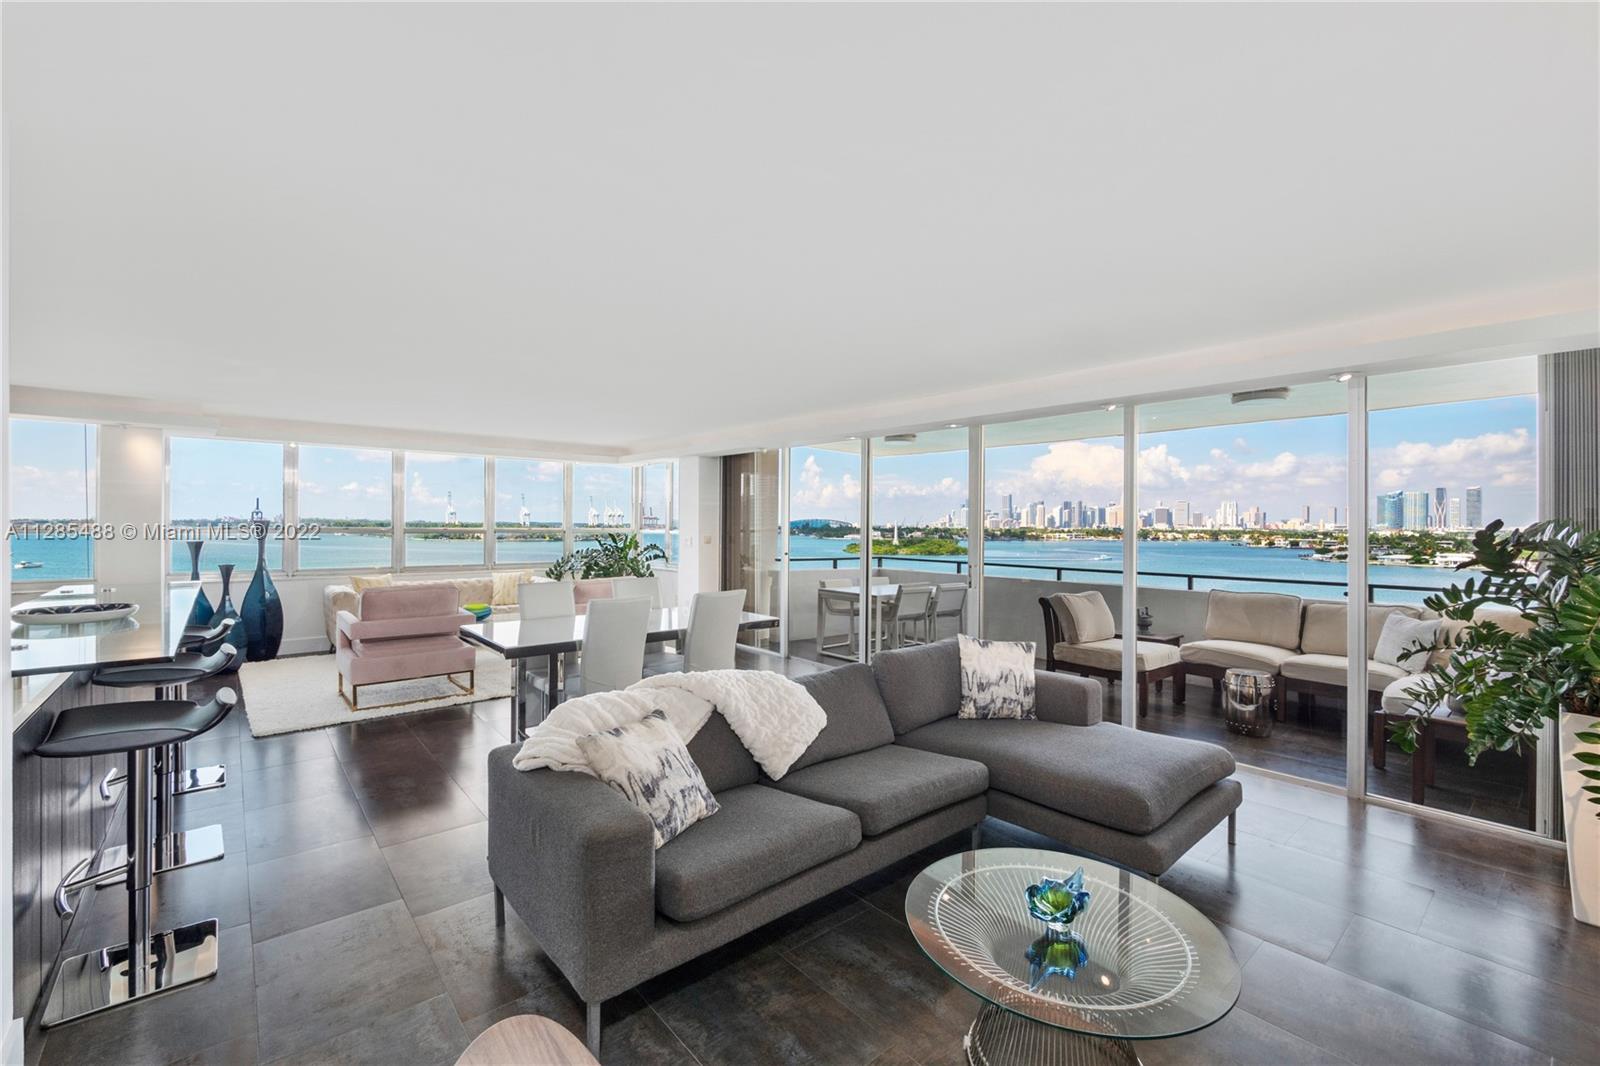 Located in the heart of Belle Isle, this spacious oasis boasts breathtaking open bay and downtown Miami views. This rarely available "01" line offers expansive water and skyline views from every room. The open kitchen and bar seamlessly flow into the oversized living and dining room. The Master and Jr. Master suites, both offer walk in closets and generous double vanity bathrooms. One of the few units in the building to offer a washer and dryer in the residence. A short walk to great dining, multiple grocery stores, world class fitness and all that the highly coveted neighborhood of Sunset Harbour has to offer.